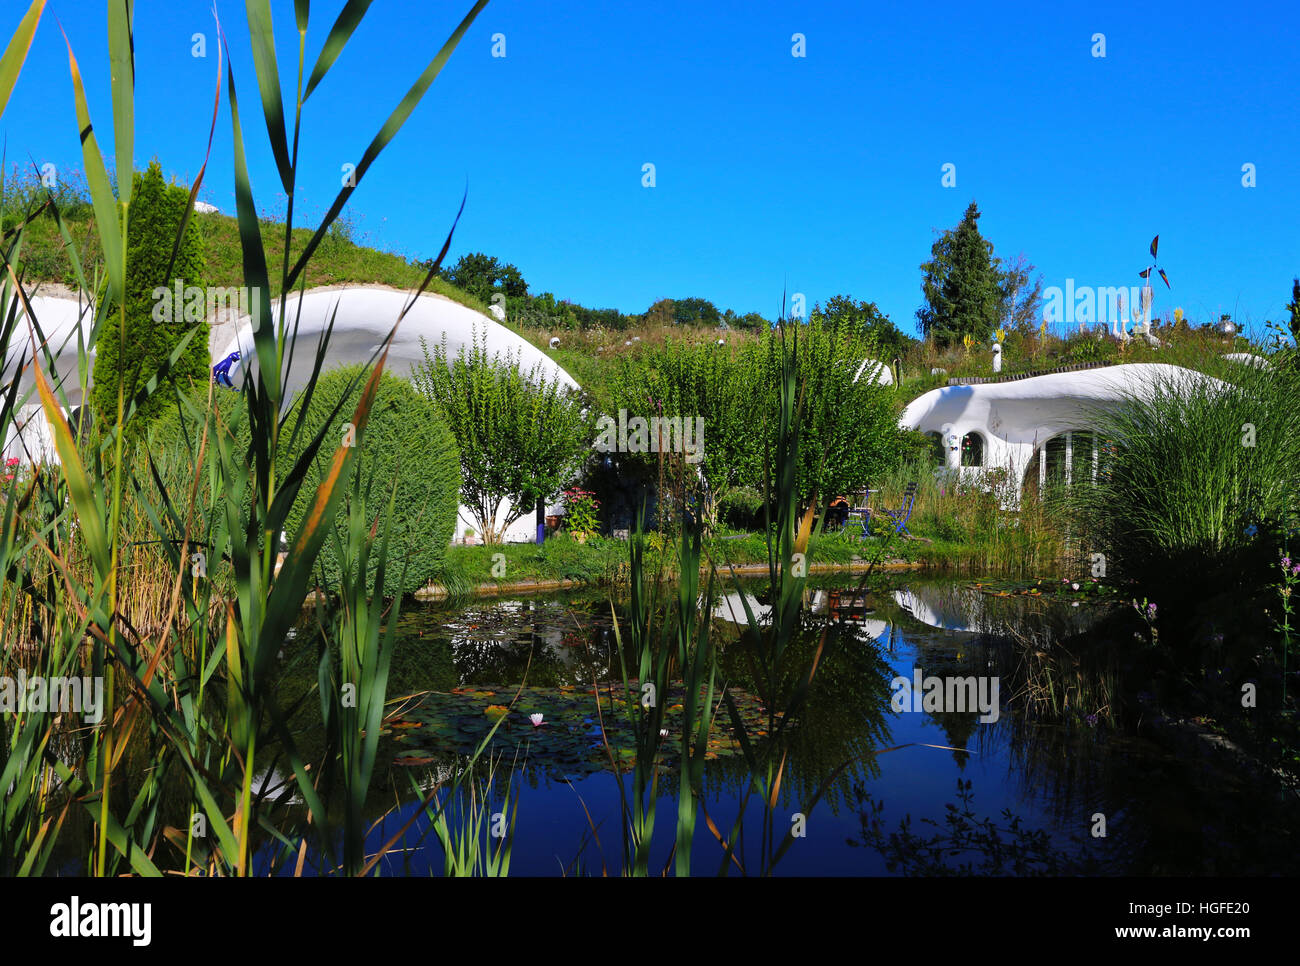 earth houses with Teich Stock Photo